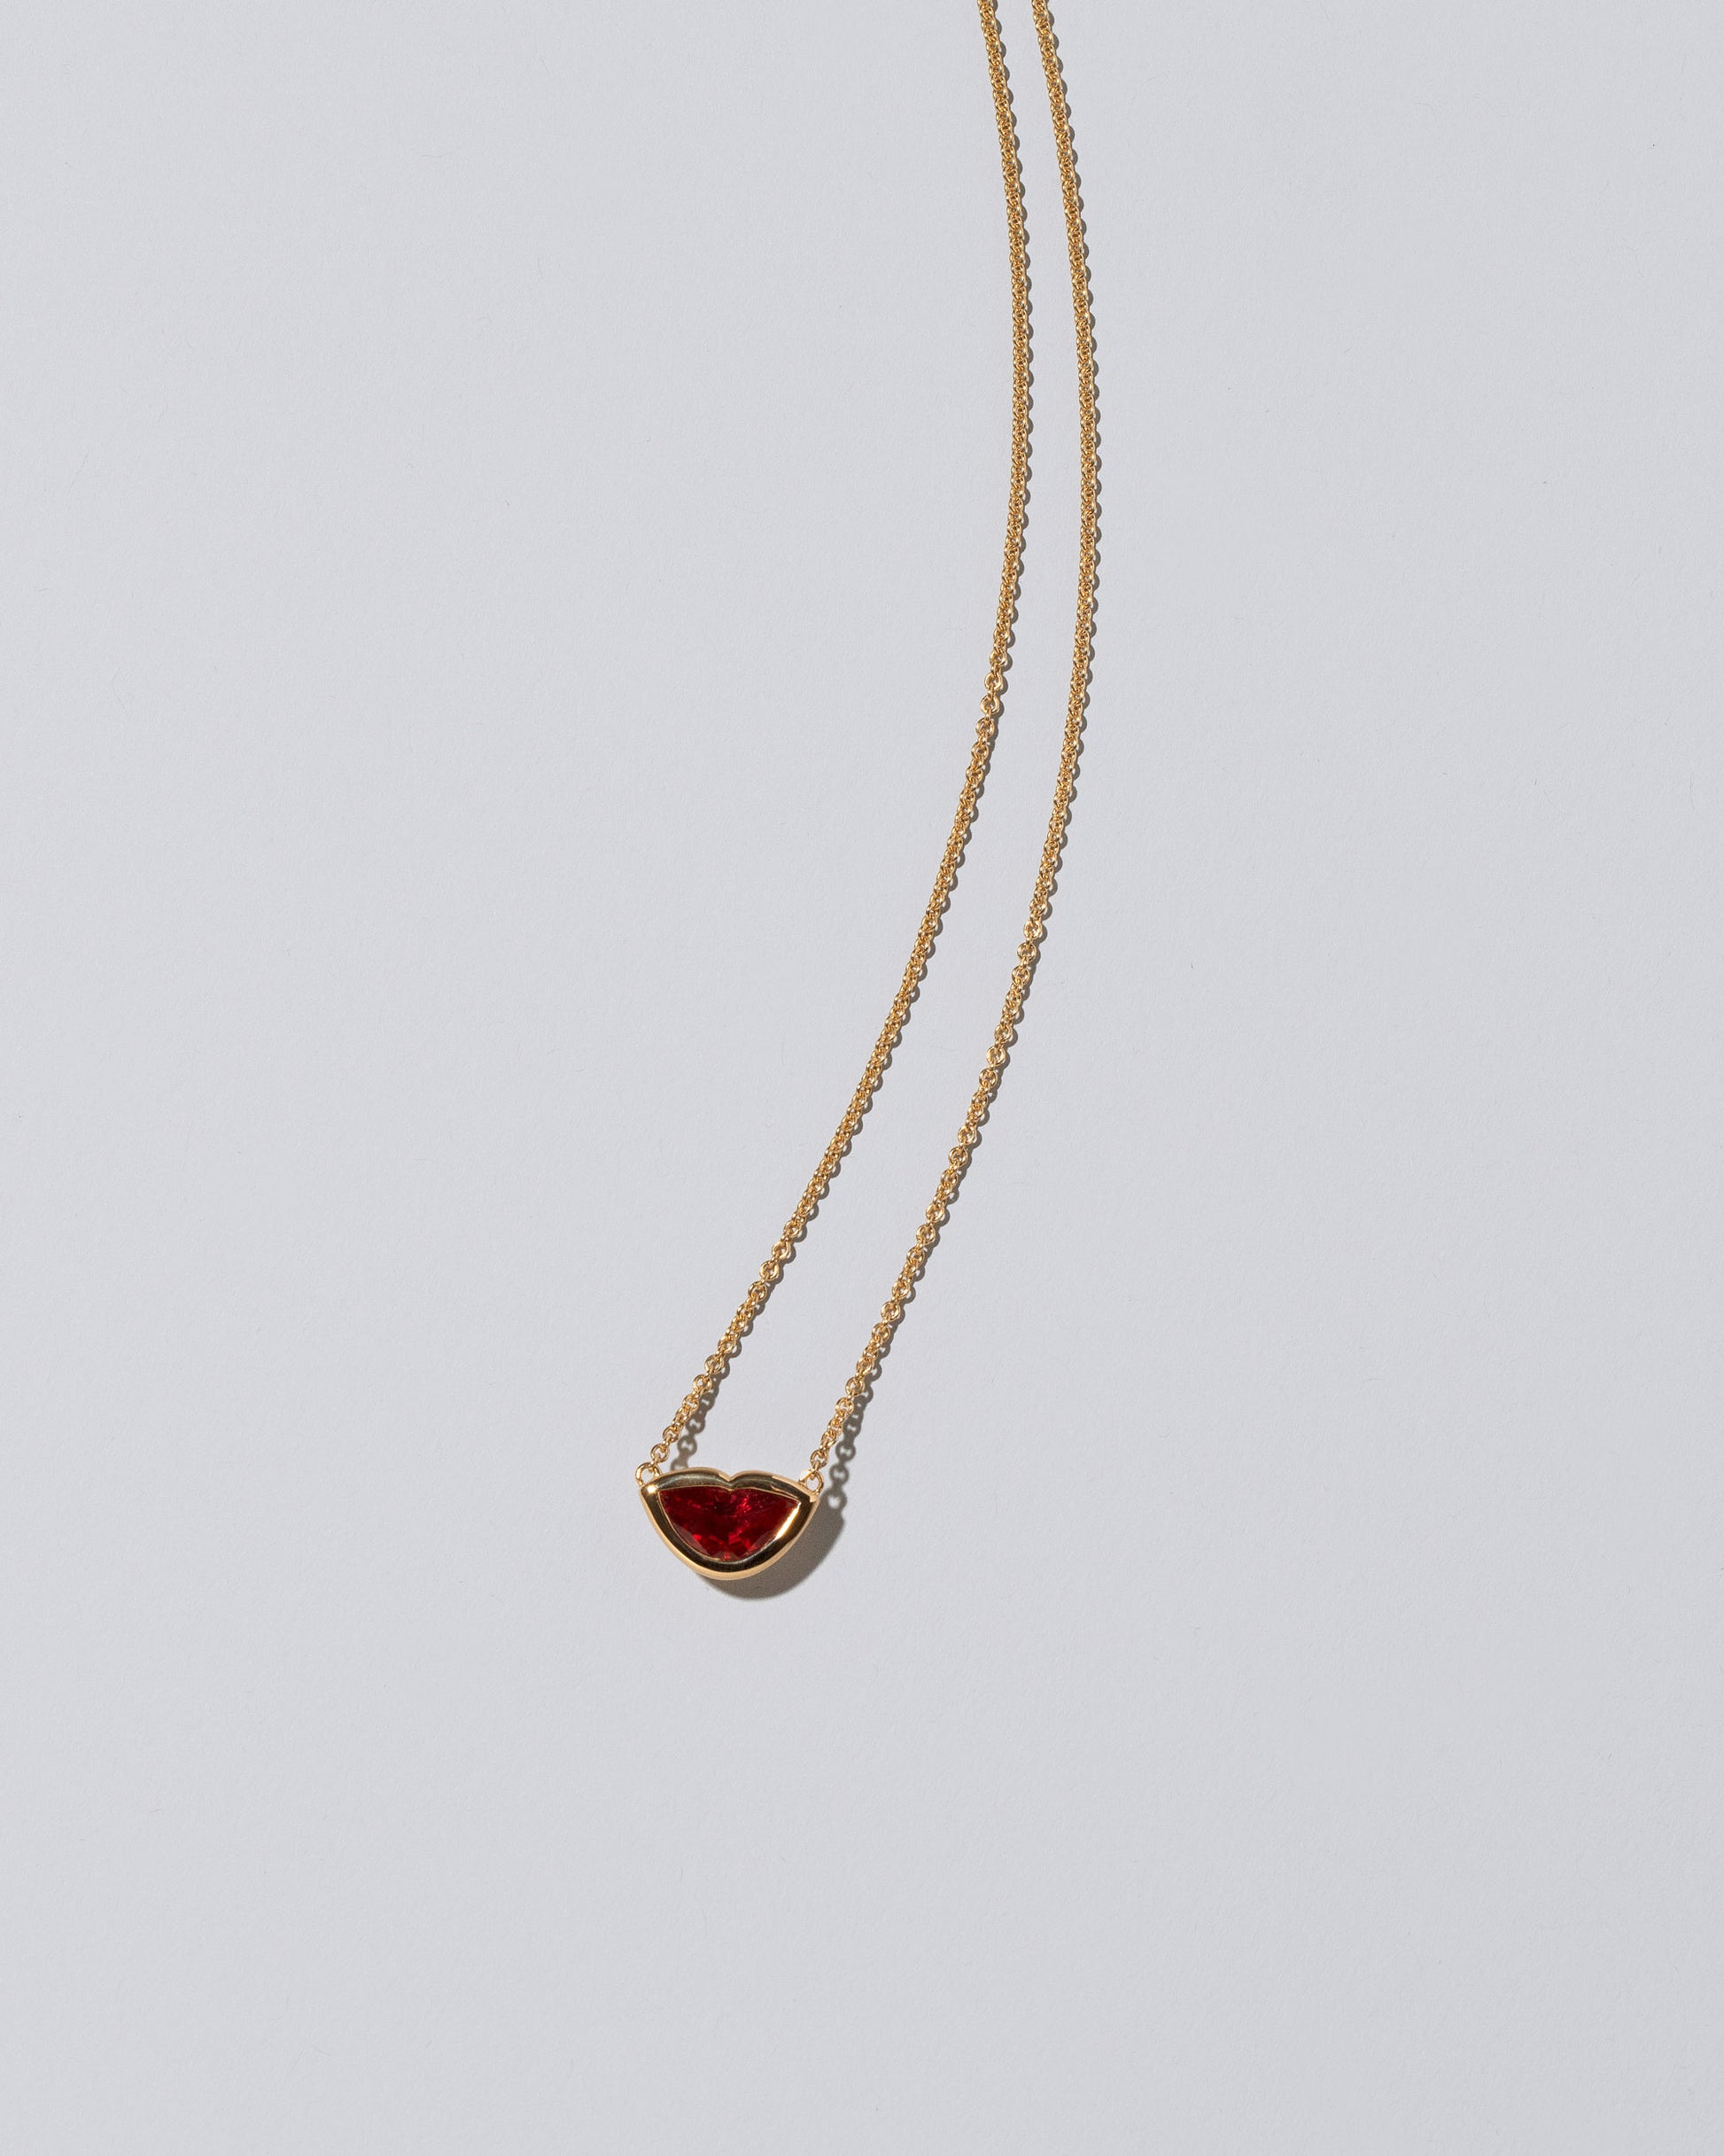 Closeup detail of the Red Spinel Lover's Kiss Necklace on light color background.